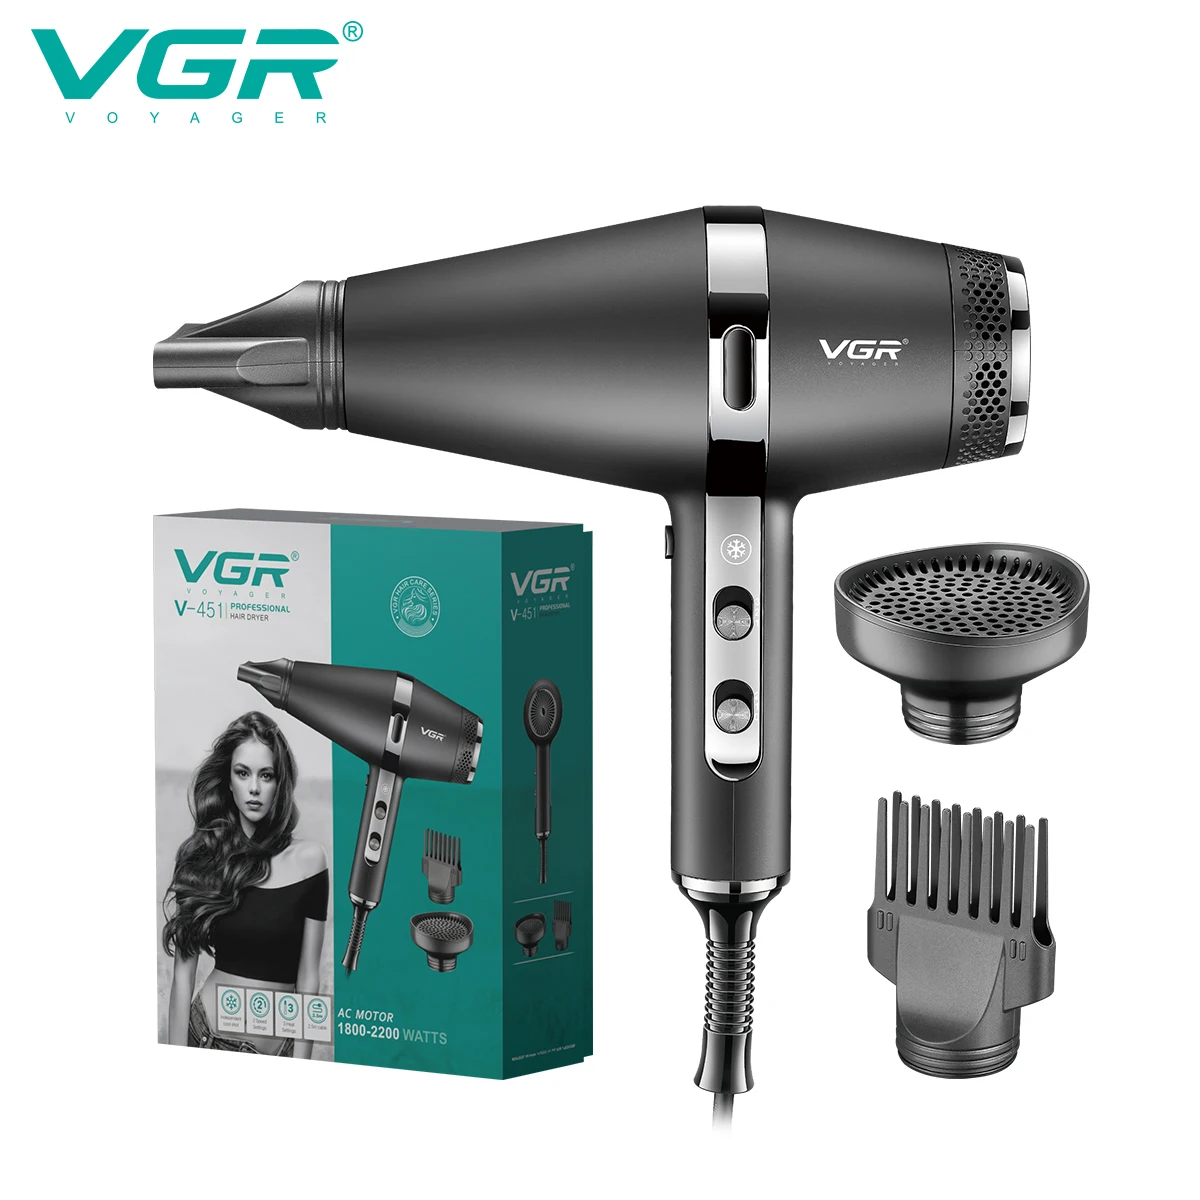 

VGR Professional Hair Dryer Negative Ions Hair Blow Dryer 2200W Adjustable High Power Negative Ions Blow Dryer with Comb V-451